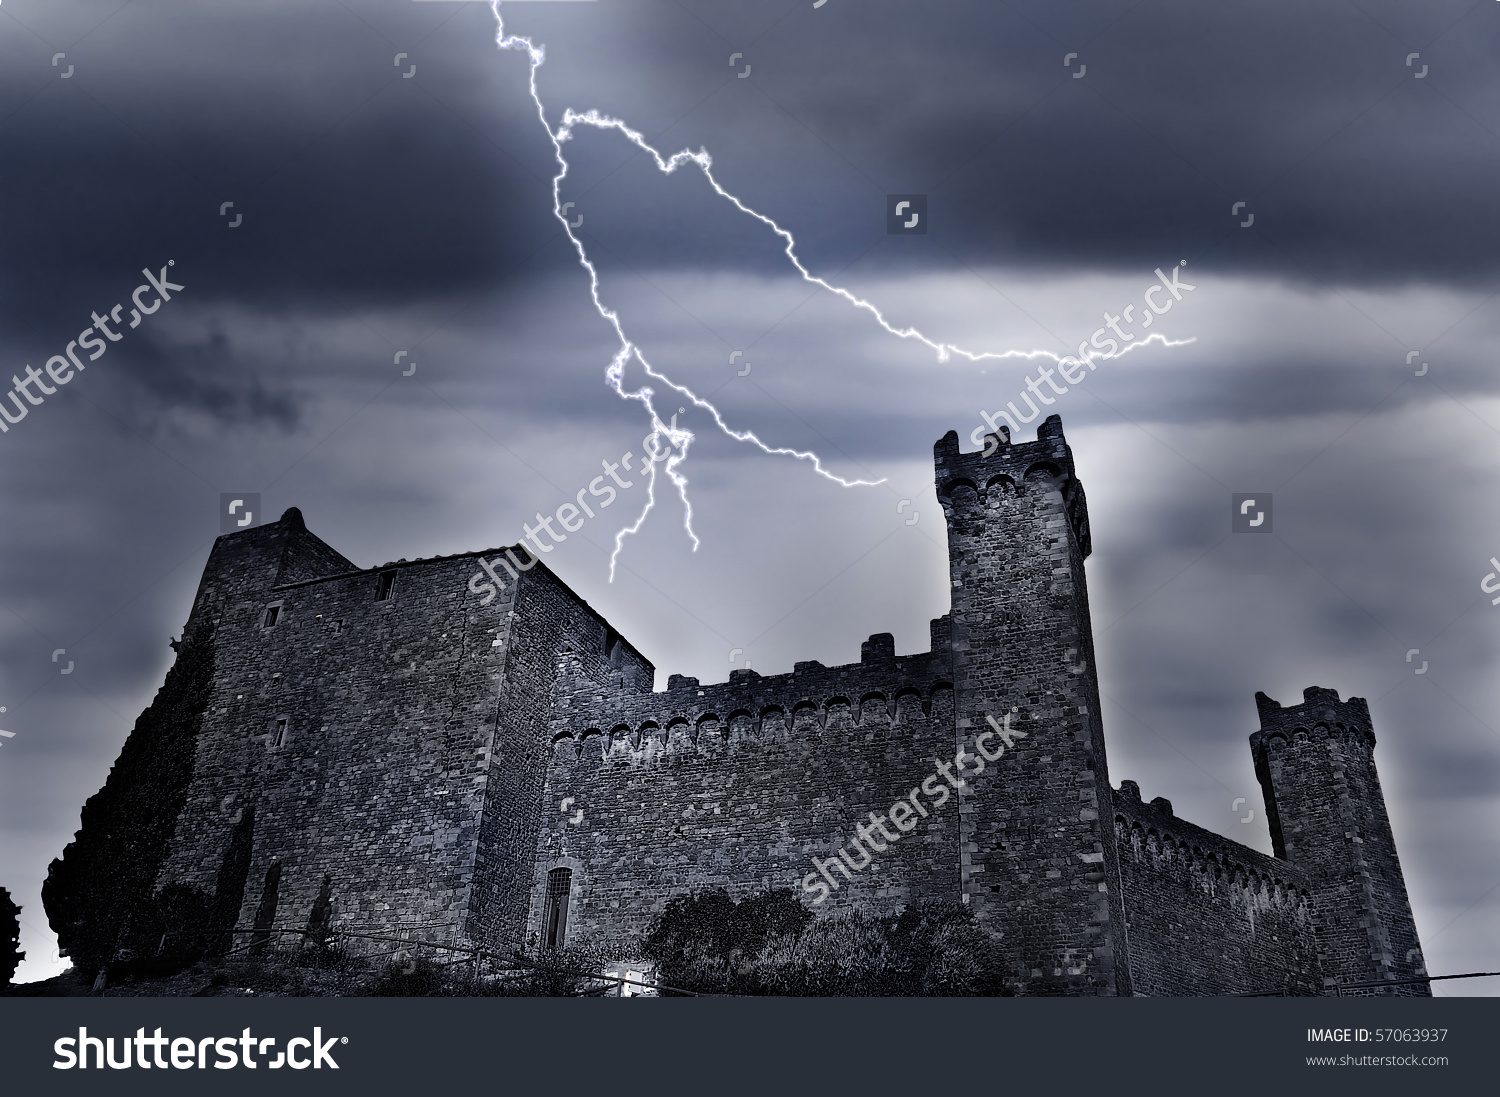 Old Castle Dark Ominous Clouds Lightning Stock Photo 57063937.